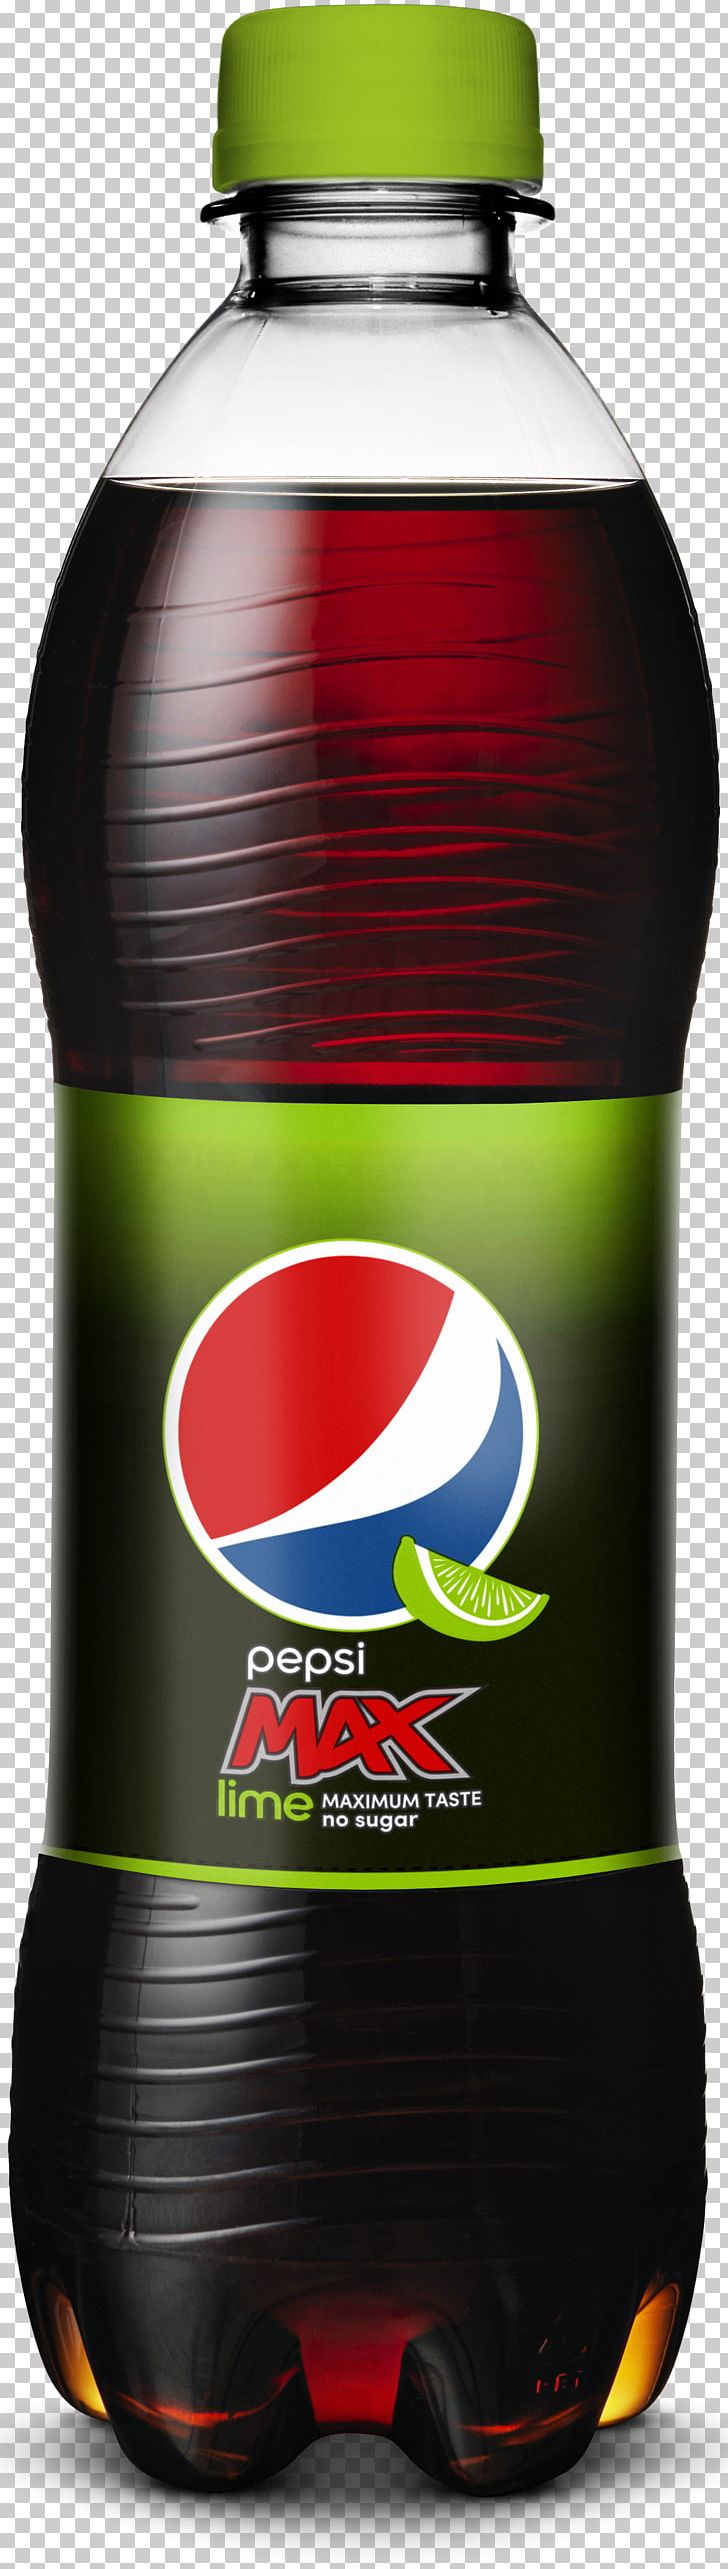 Pepsi Max Fizzy Drinks Lemon-lime Drink Iced Tea PNG, Clipart,  Free PNG Download